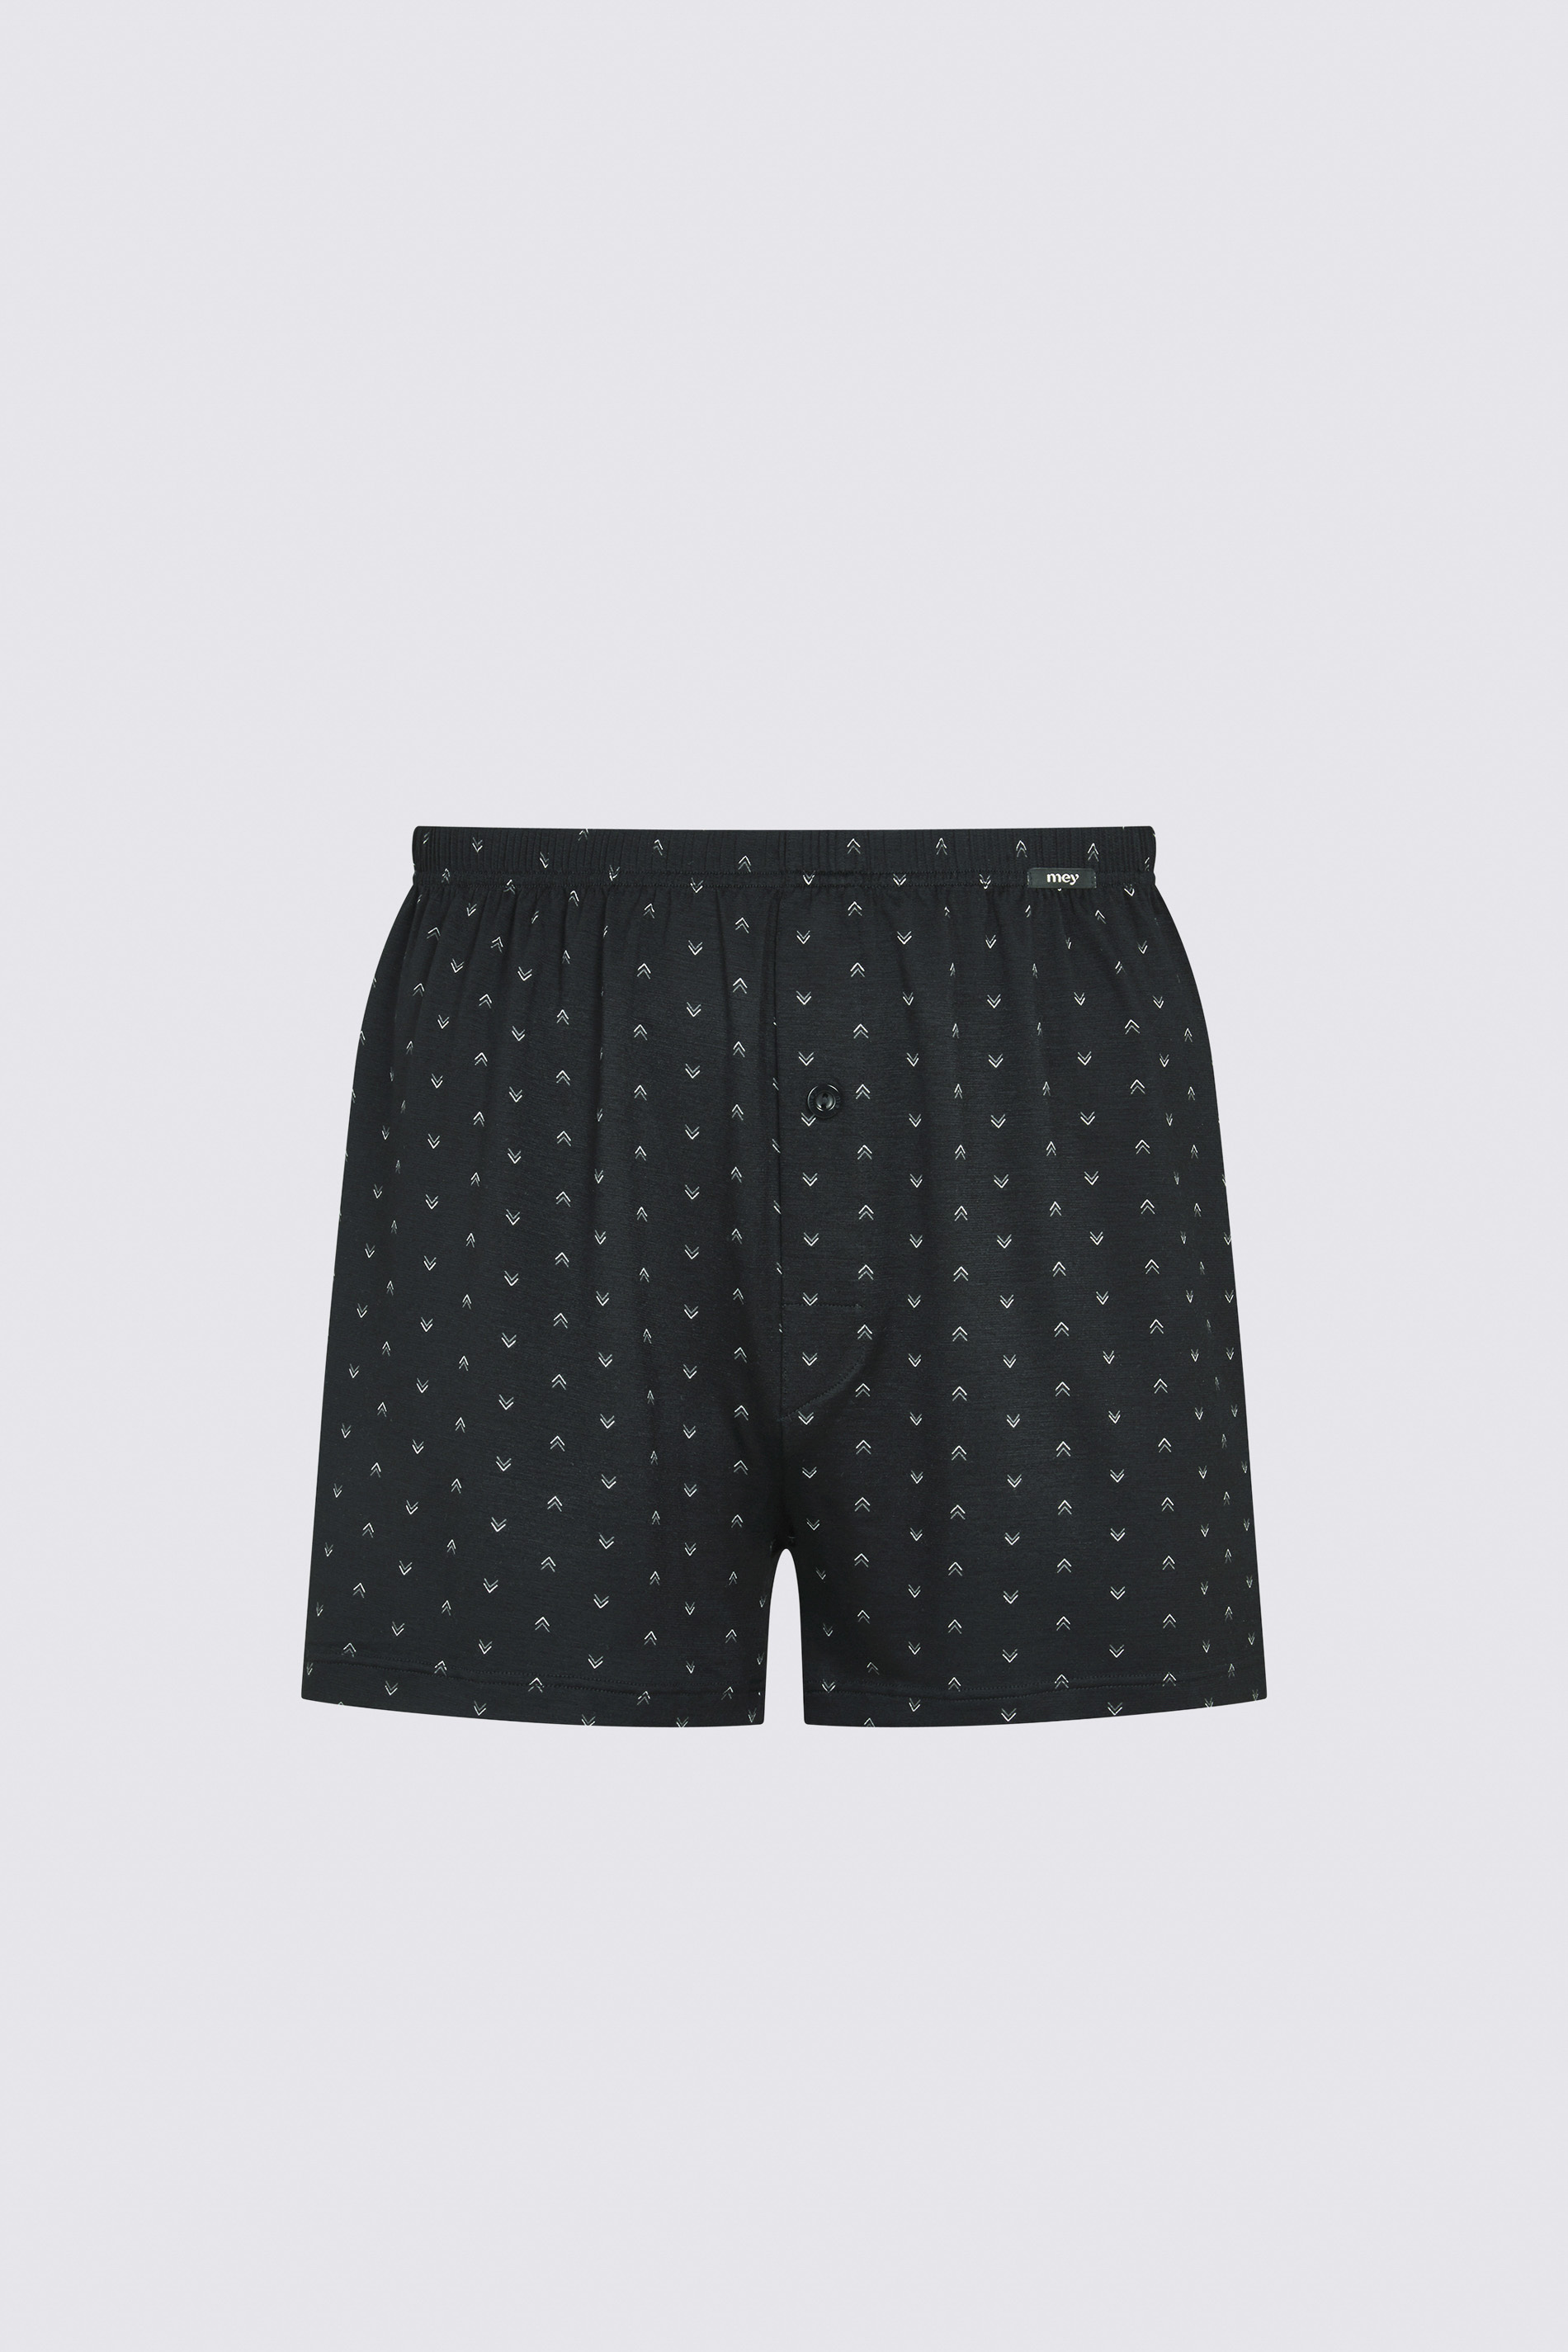 Boxershorts Zwart Serie BC Small Arrow Uitknippen | mey®